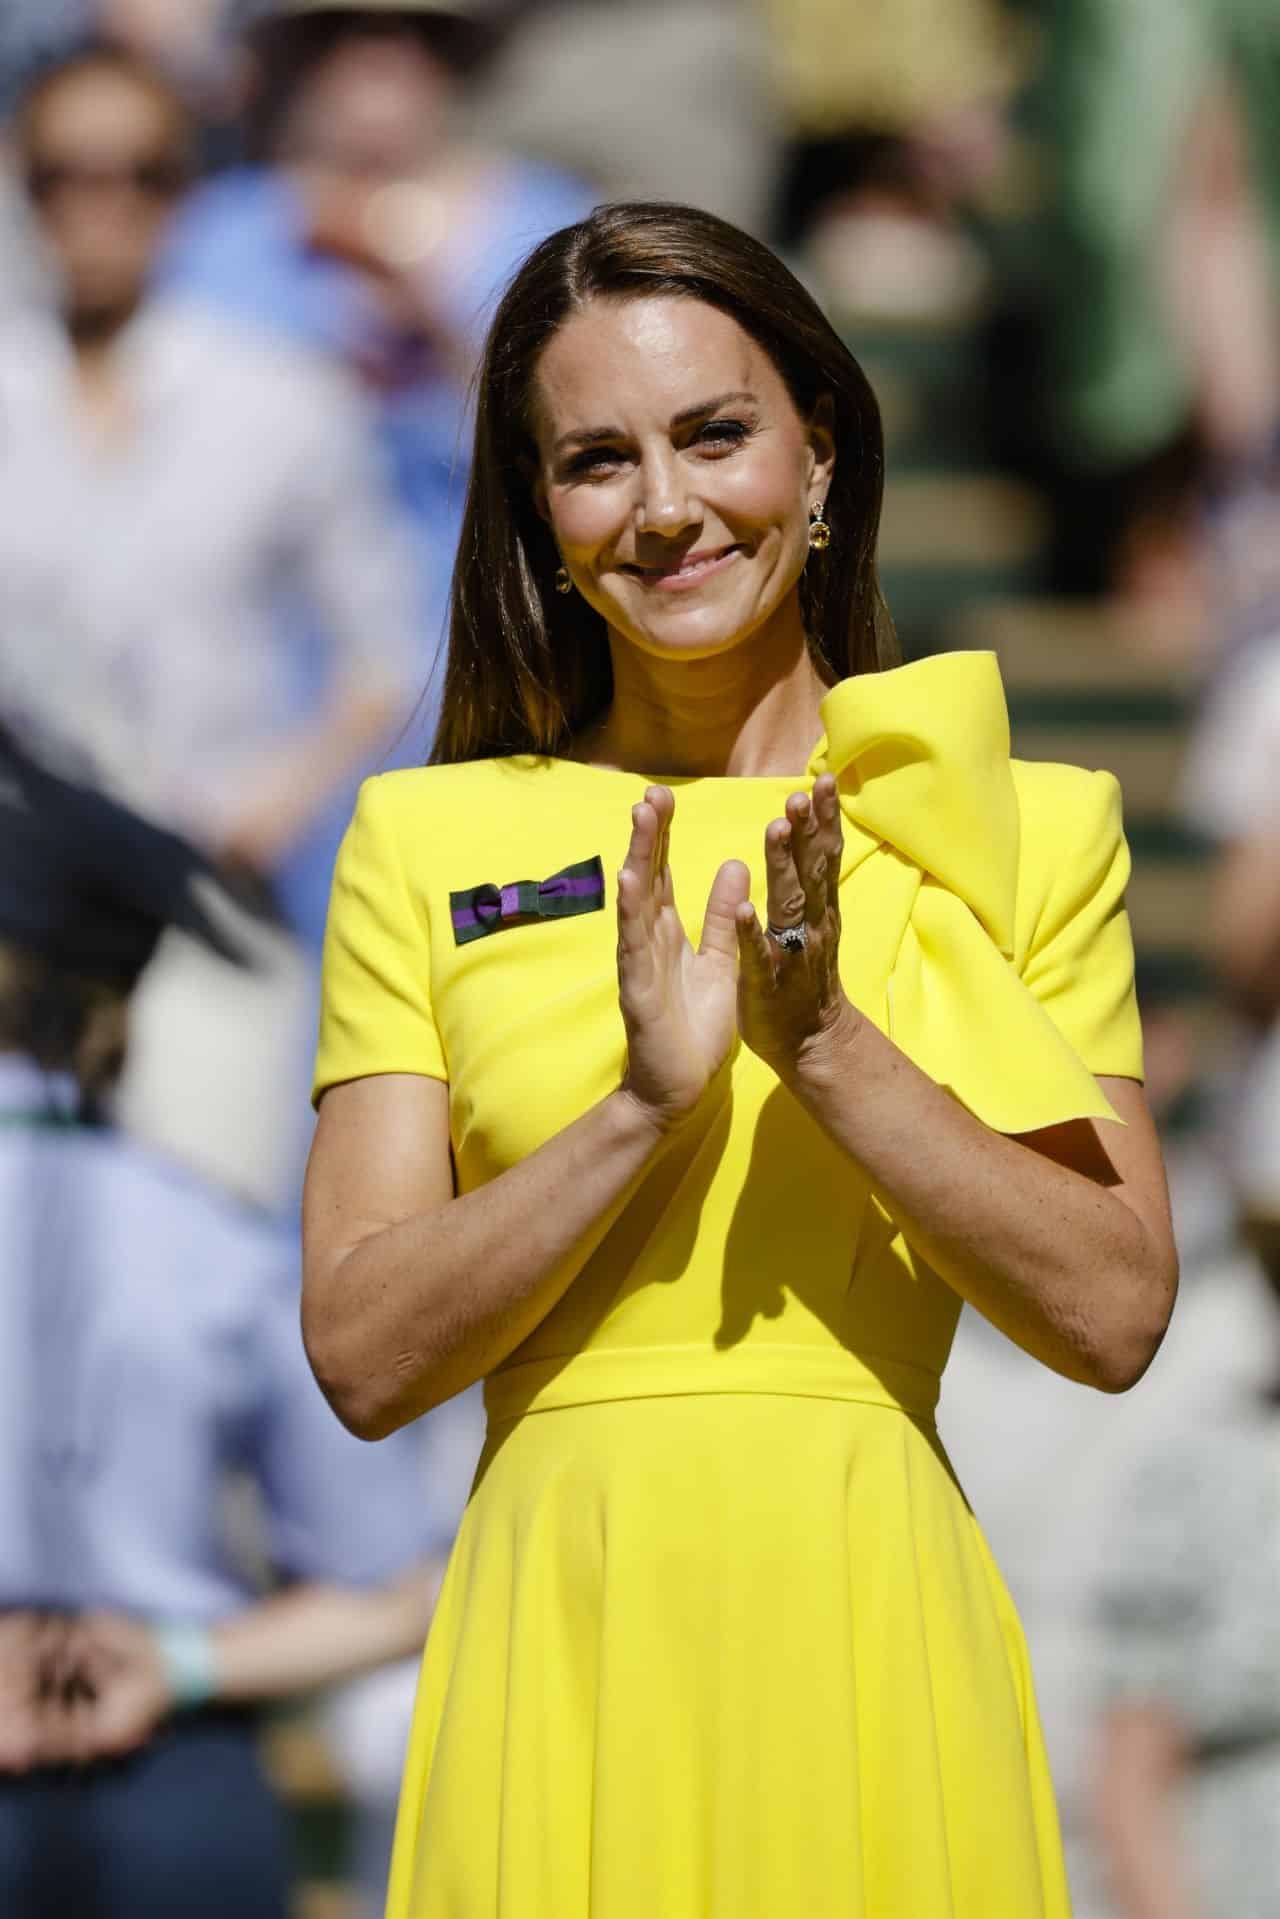 Kate Middleton Looks Amazing in Yellow Dress at the Wimbledon Women’s Final